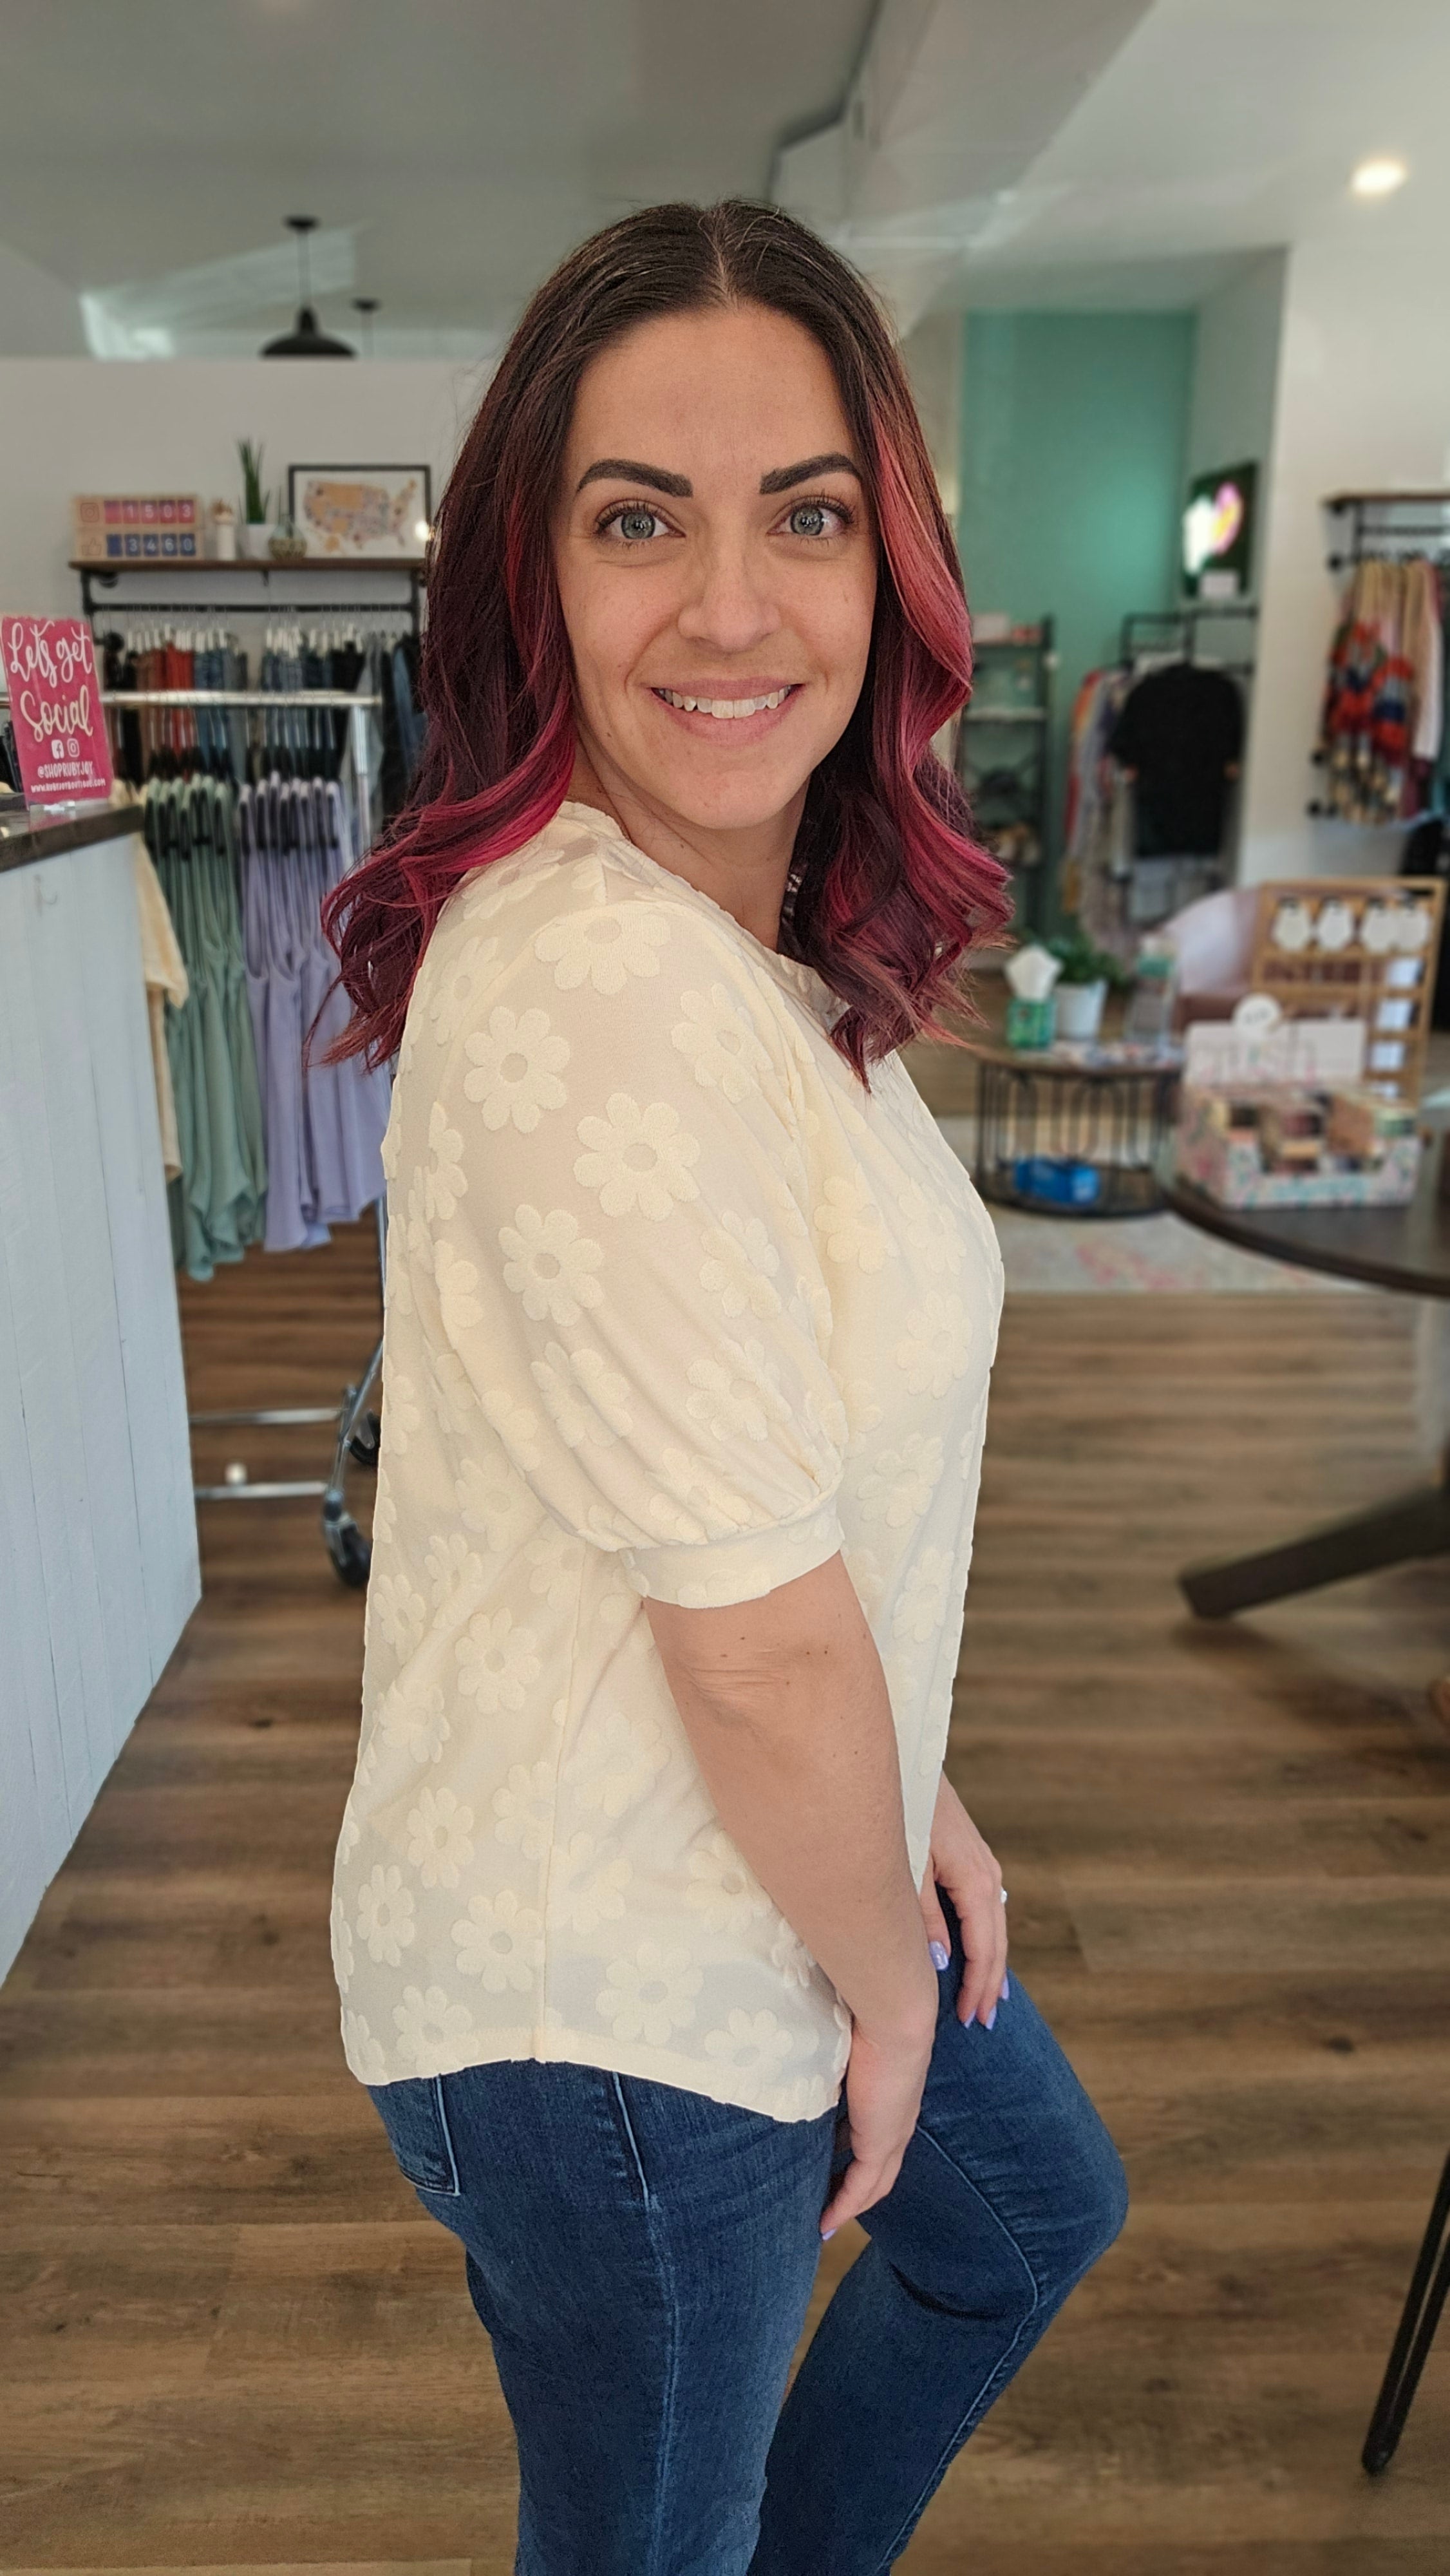 Shop Blossom Floral Pattern Top-Blouse at Ruby Joy Boutique, a Women's Clothing Store in Pickerington, Ohio